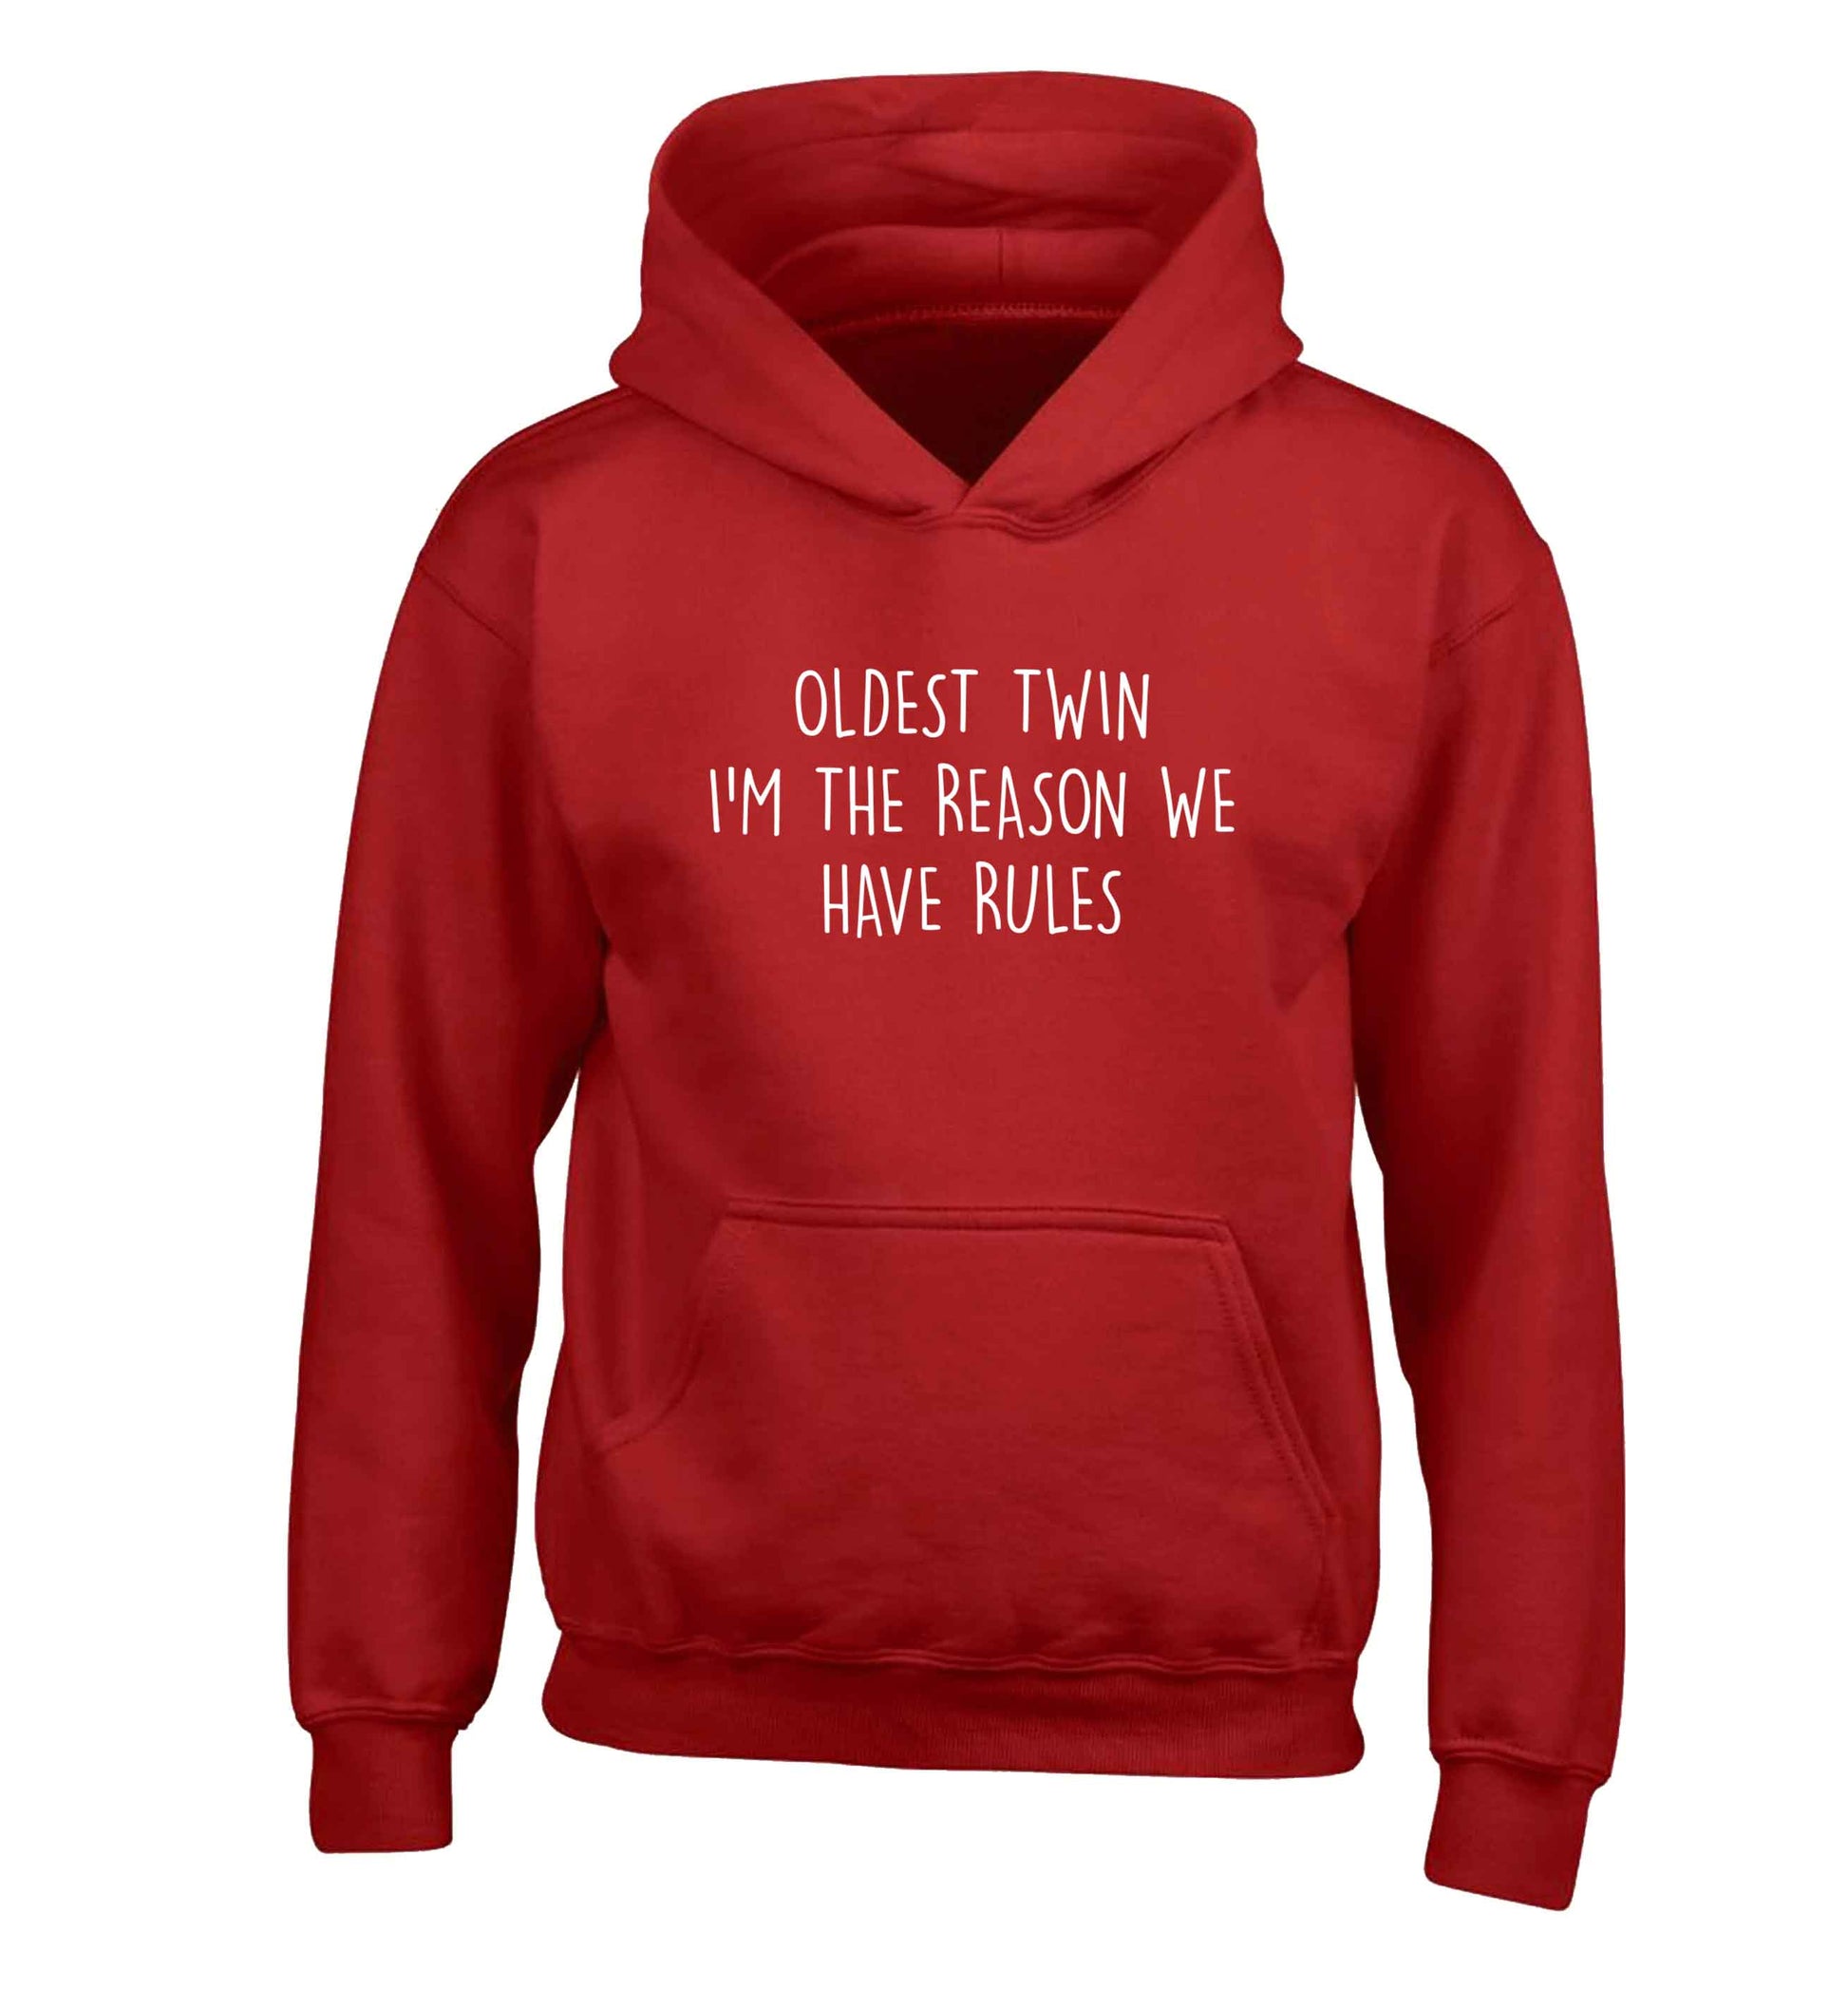 Oldest twin I'm the reason we have rules children's red hoodie 12-13 Years